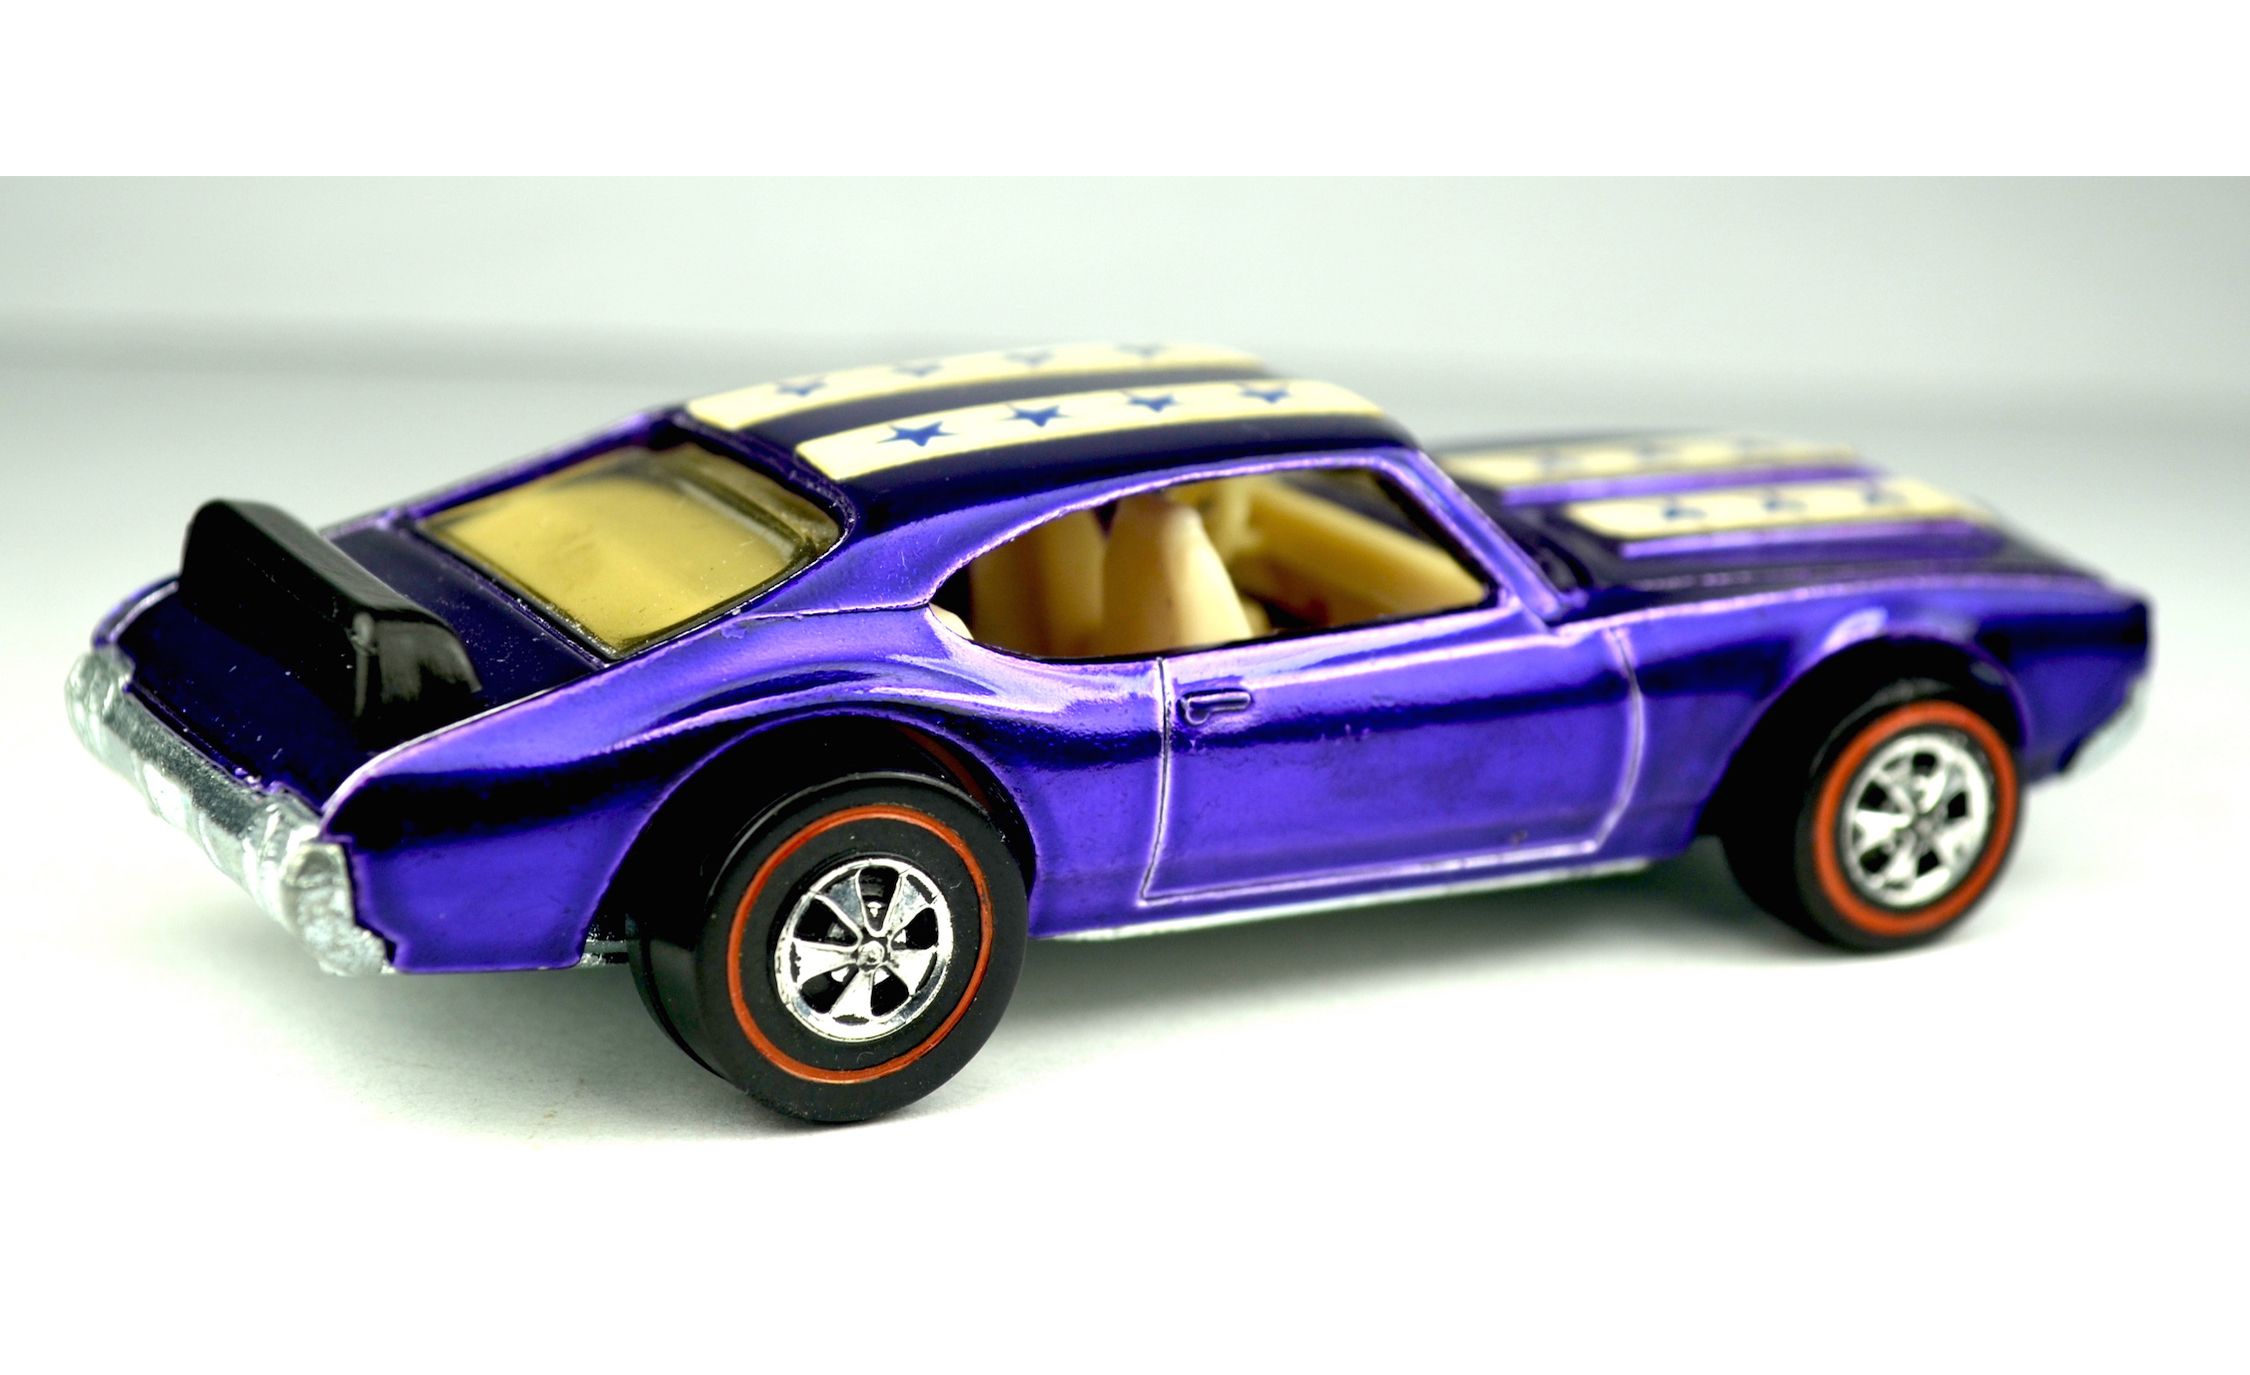 most expensive hot wheel ever sold